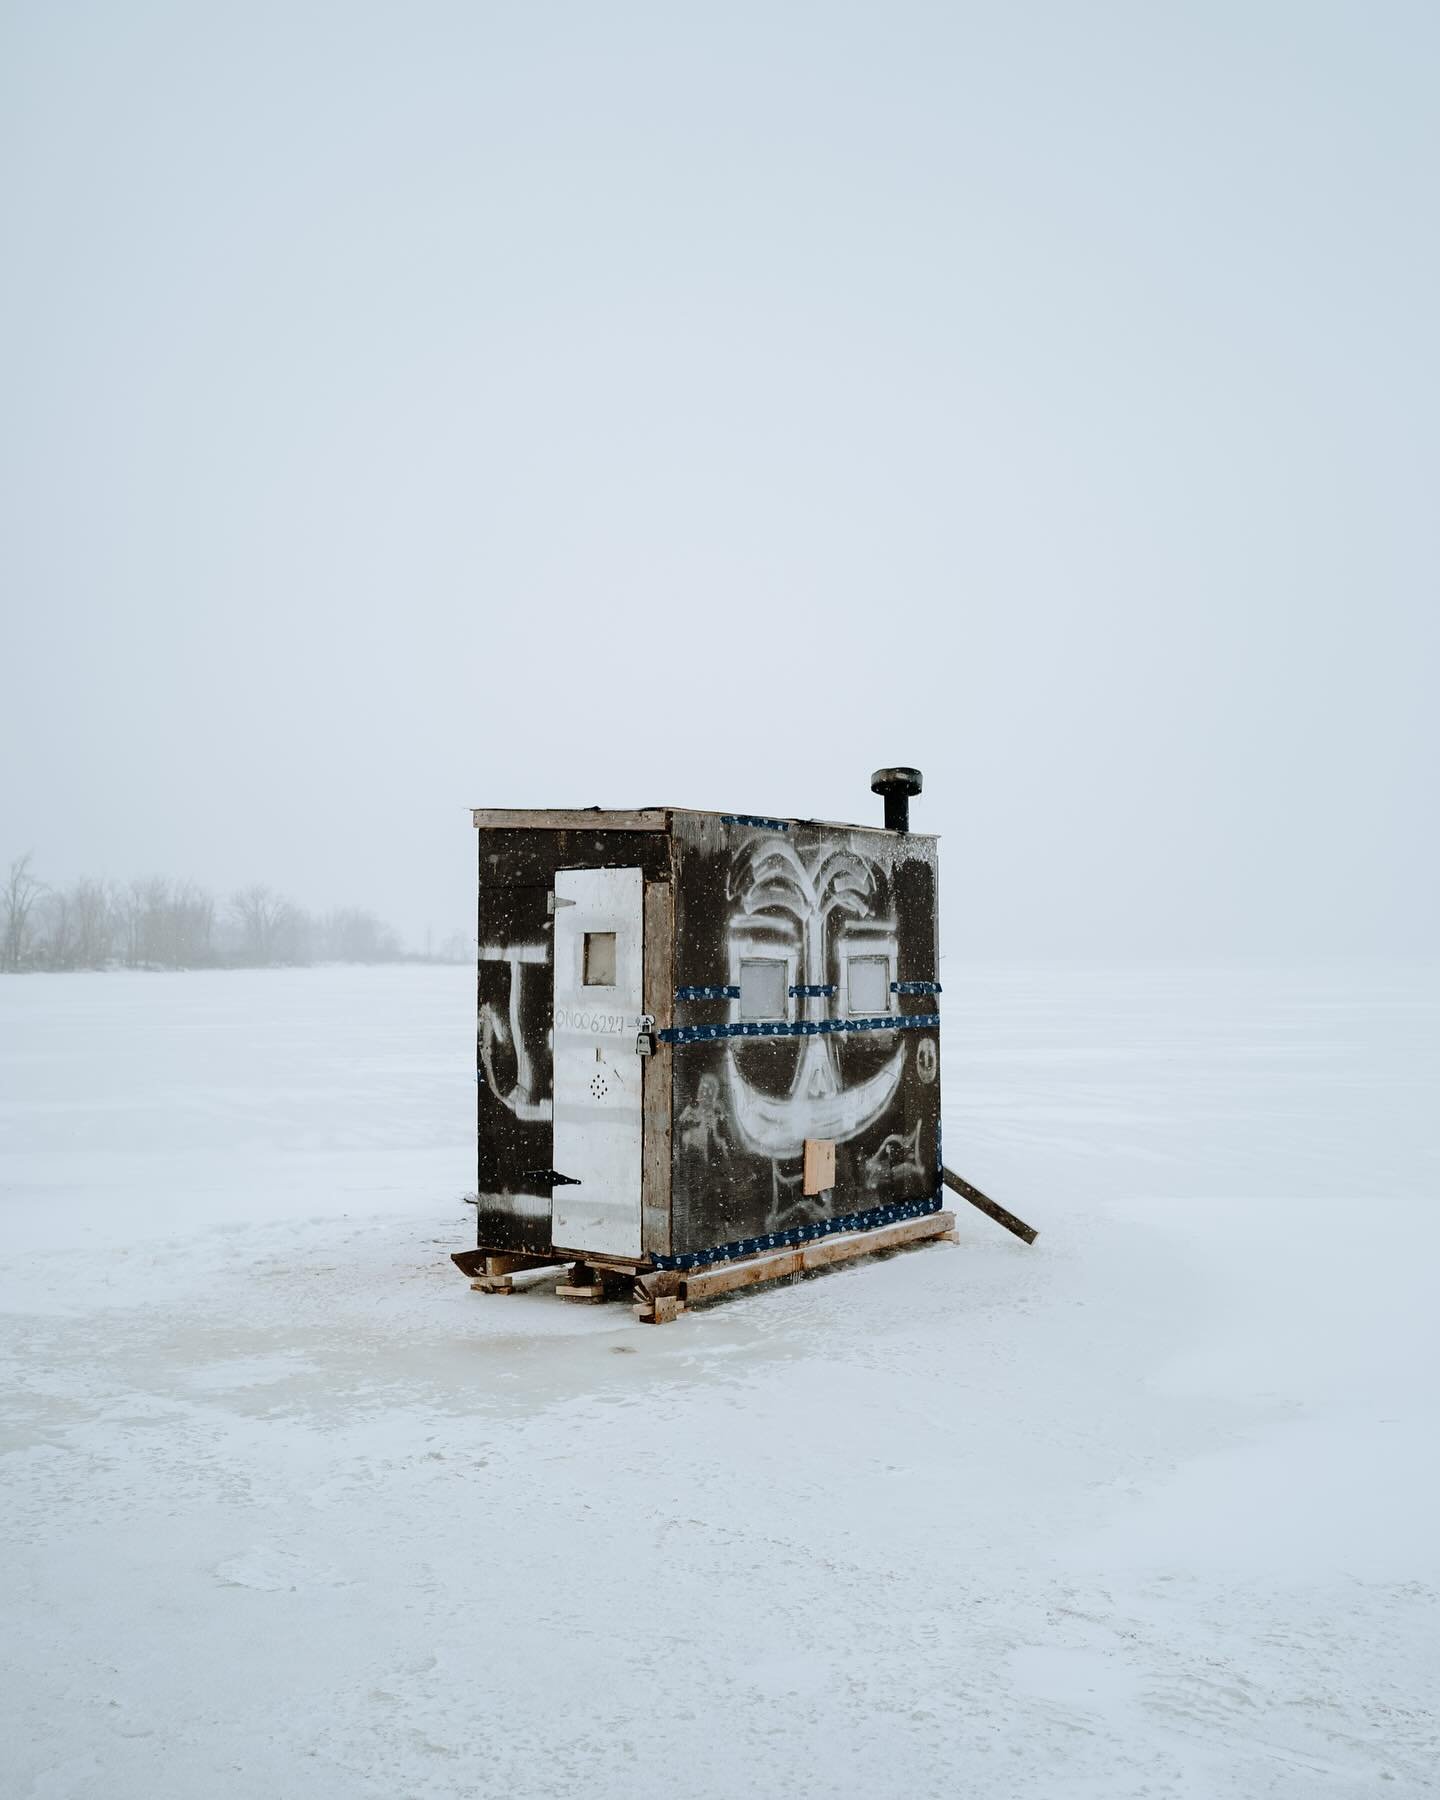 I still think @jim.jarmusch should consider a film set in the seasonal world of ice fishing.
Kind of like 'Fishing with John' but feature length.
Here's some photographic inspiration for you Jim.
A few images from my multi-year ongoing Ice Shack proj